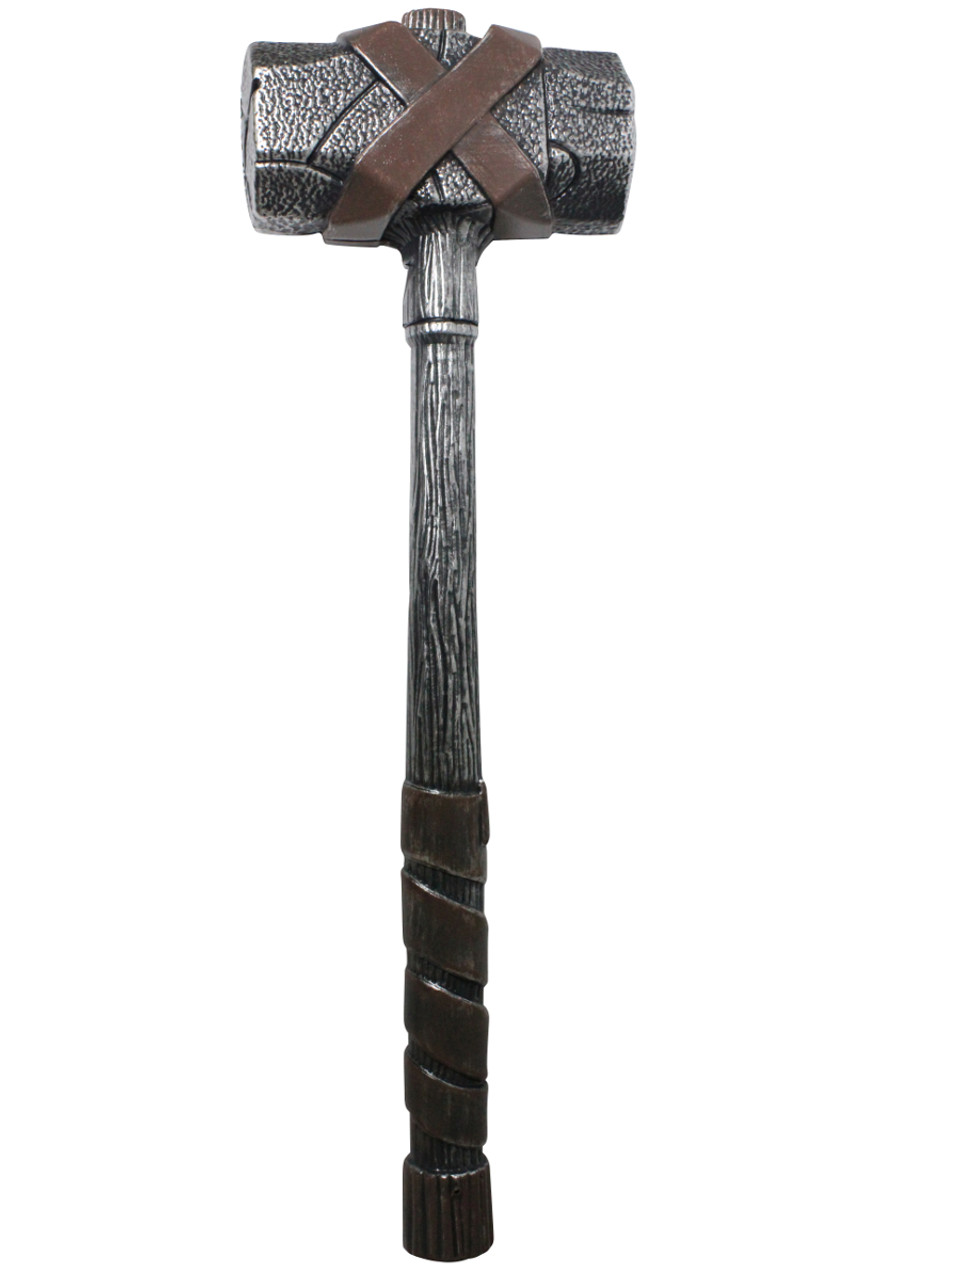 Sledgehammer Weapon Toy Costume Accessory